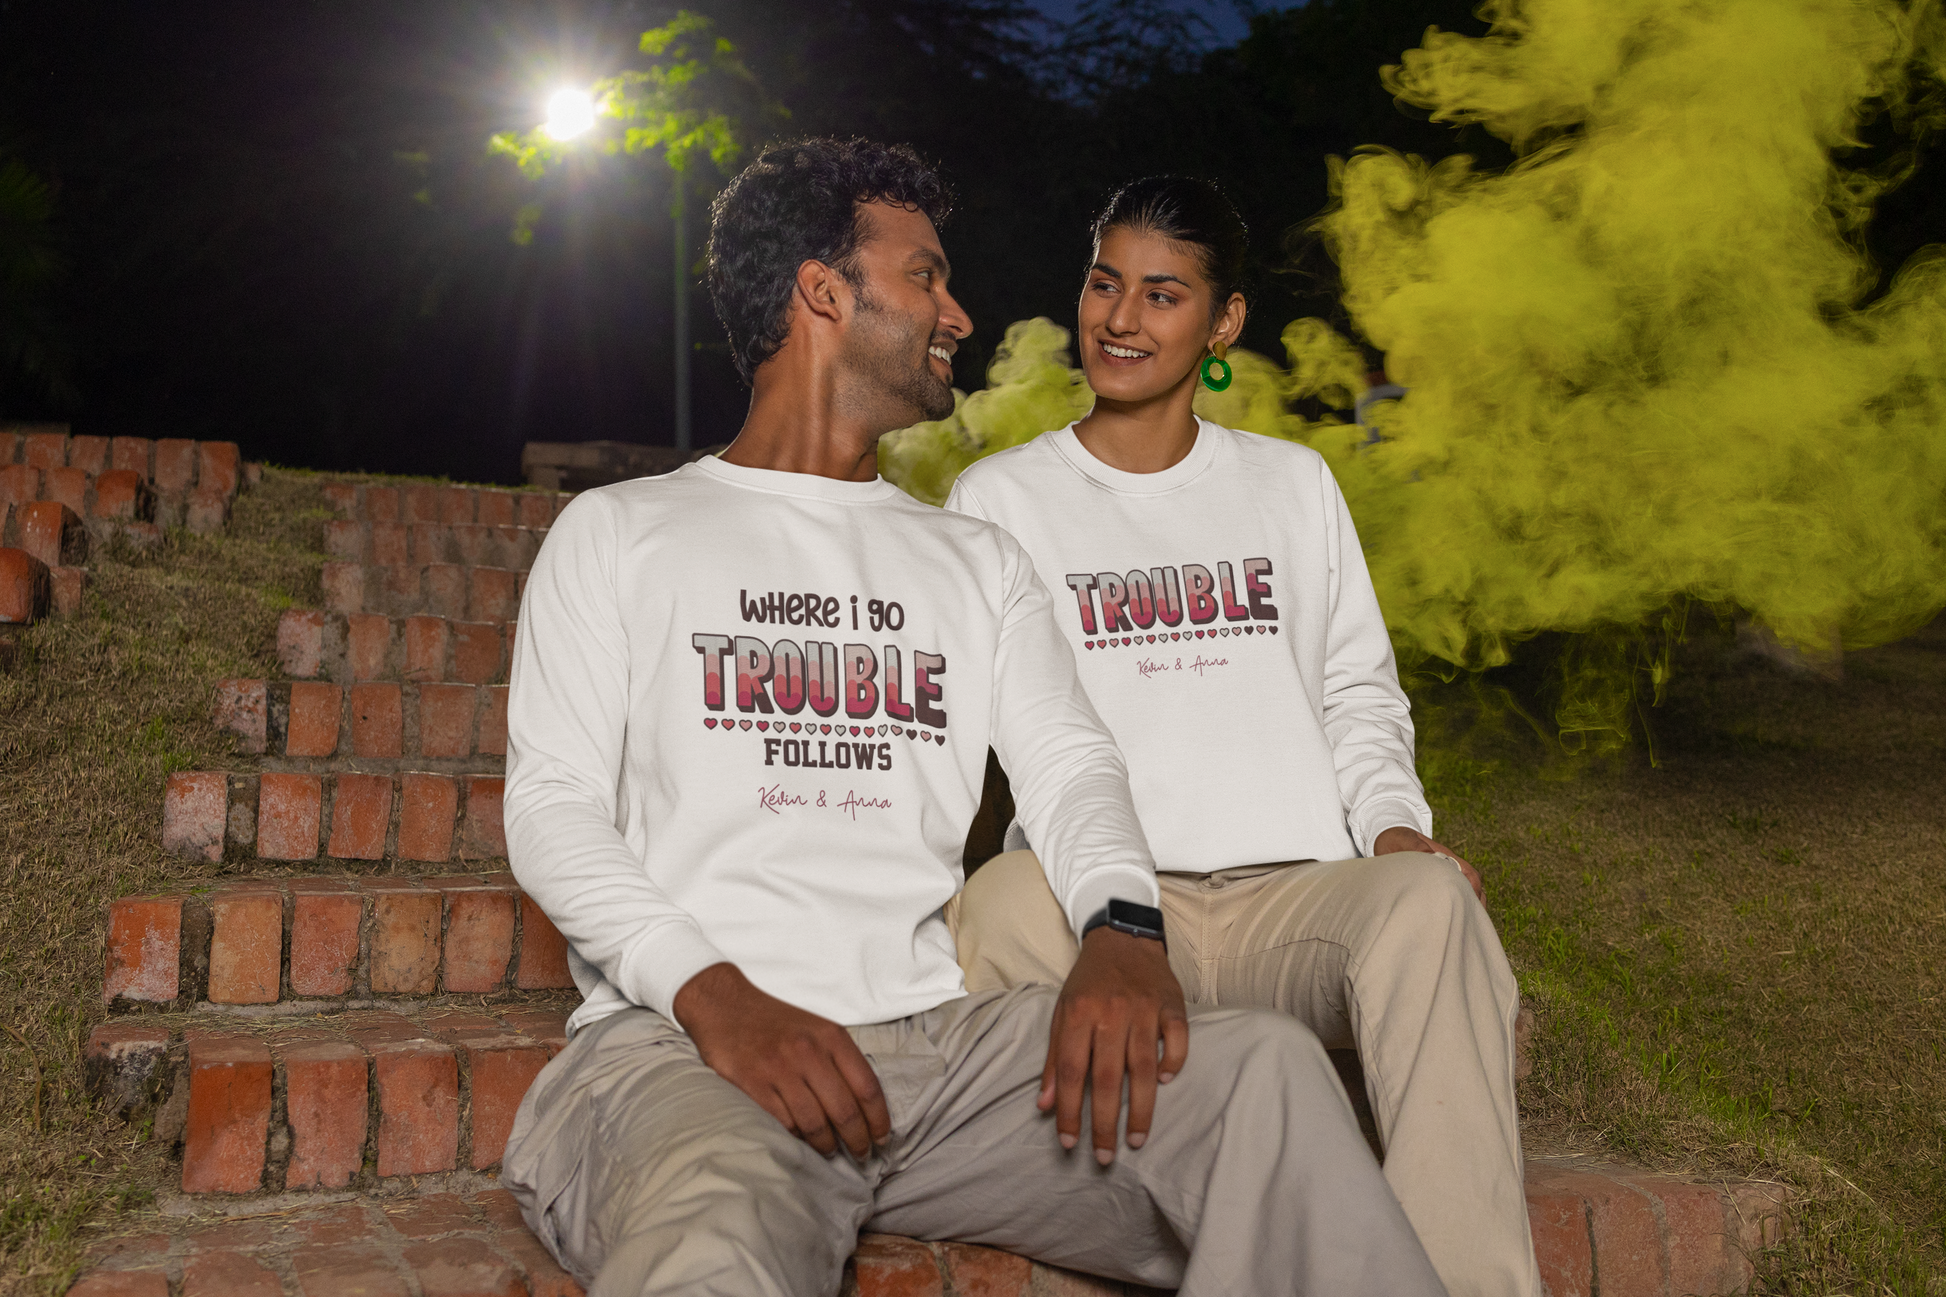 Where I Go Trouble Follows - Embroidered Matching Shirt For Couples - Valentine's Day Gift